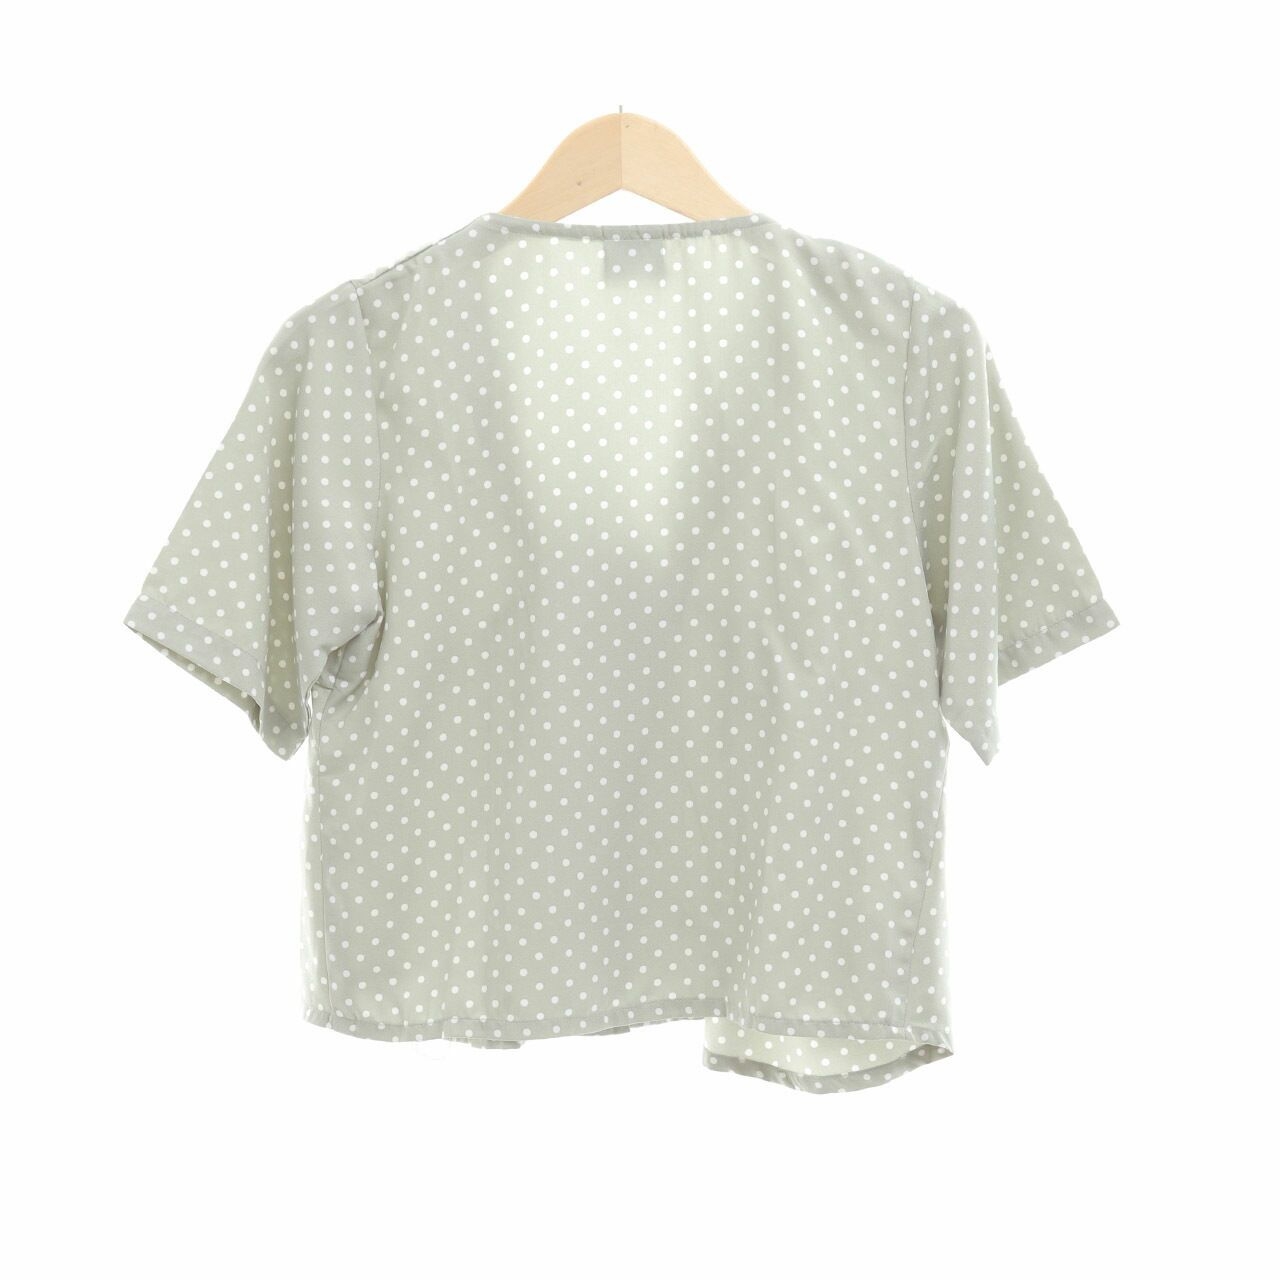 This is April Mint Polka Dot Blouse